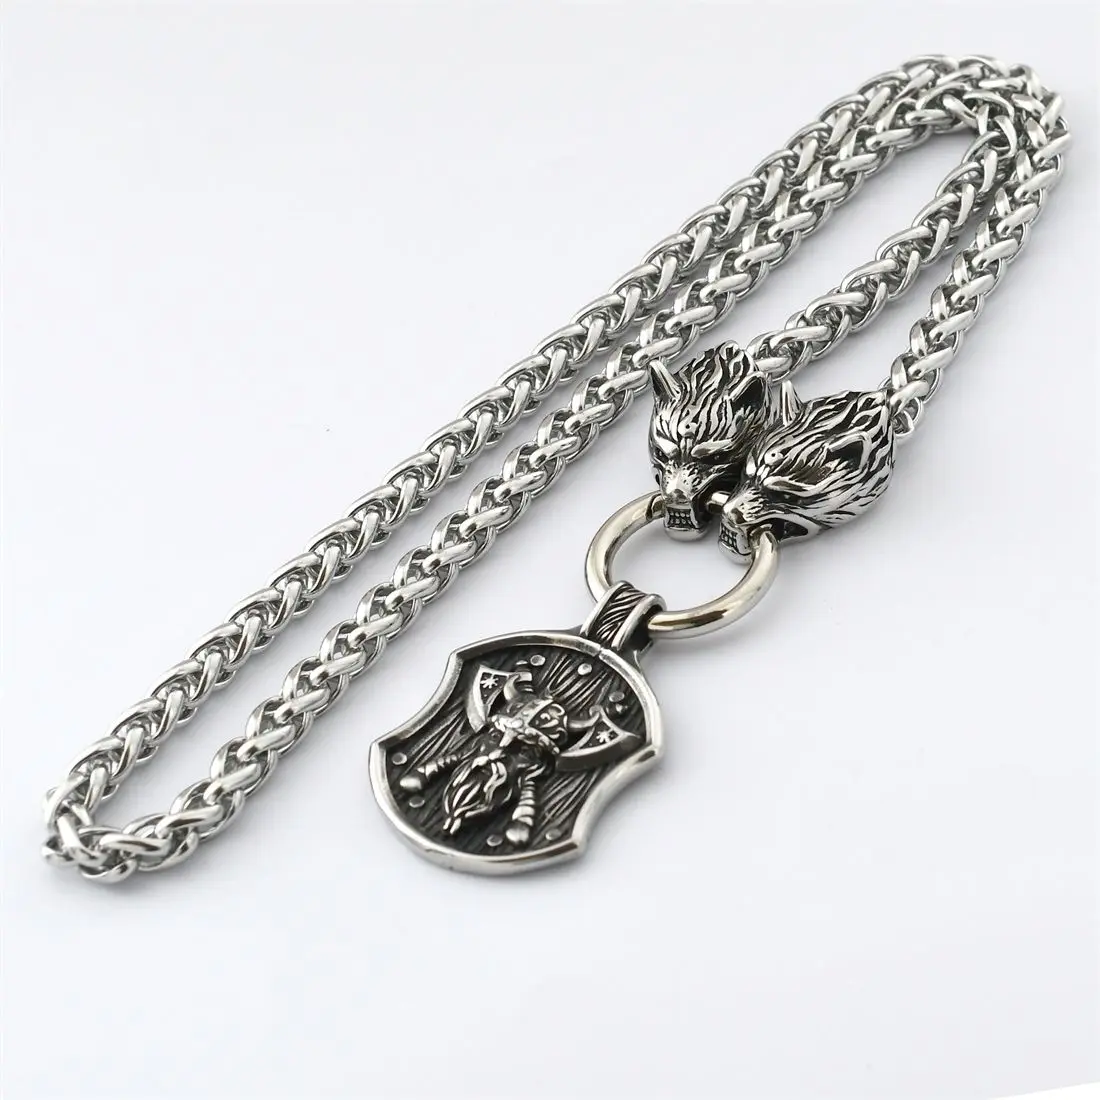 

Viking Stainless Steel Wolf Head Chain Necklace Nordic Odin Warrior Double Axe Pendant Amulet Men's Neo-Gothic Punk Jewelry